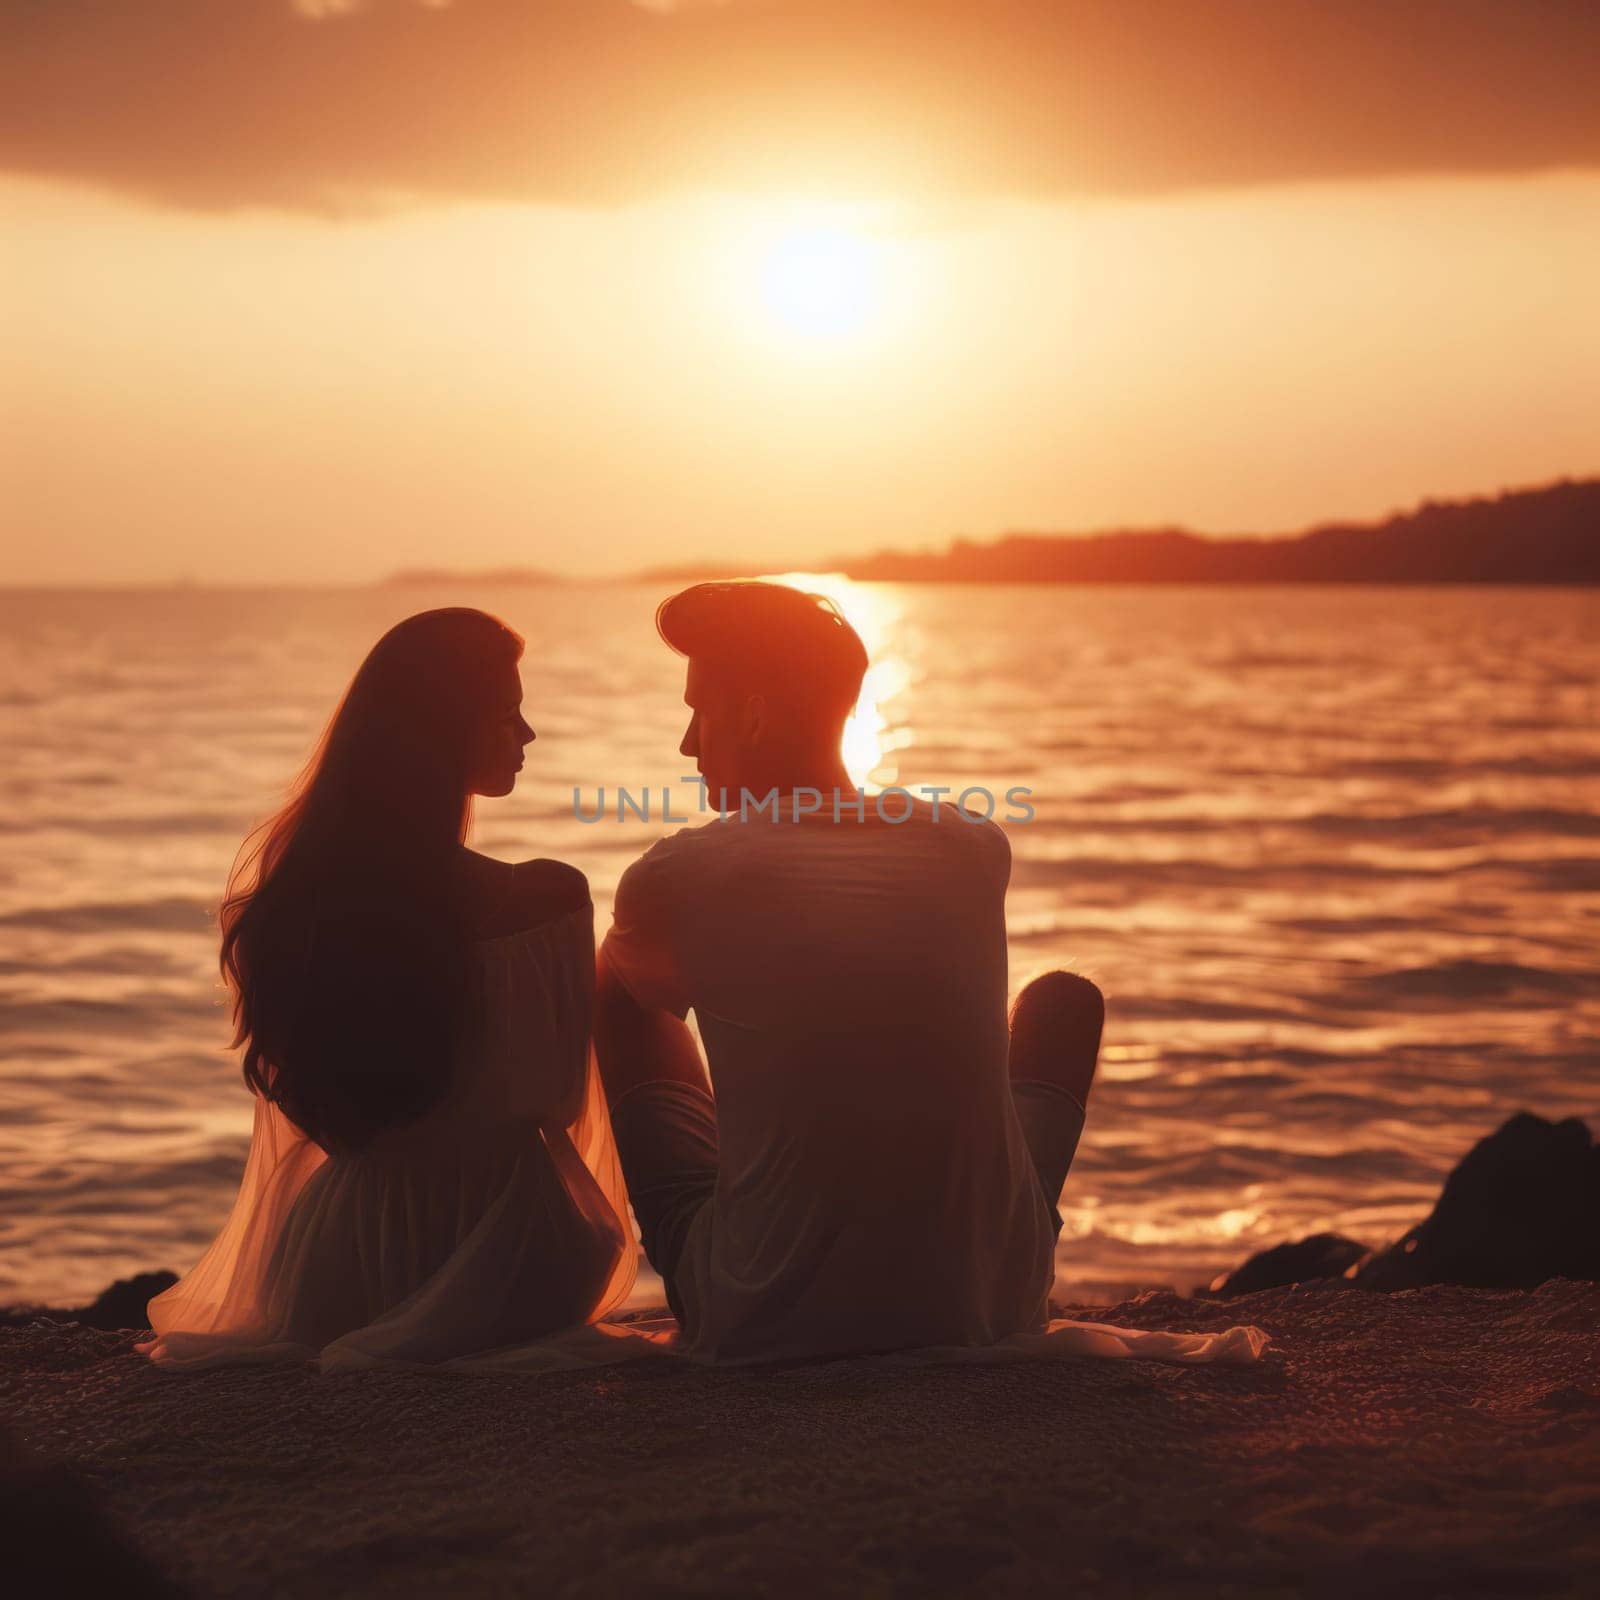 Silhouetted couple enjoying a serene sunset by the sea, creating a romantic and peaceful scene. by sfinks